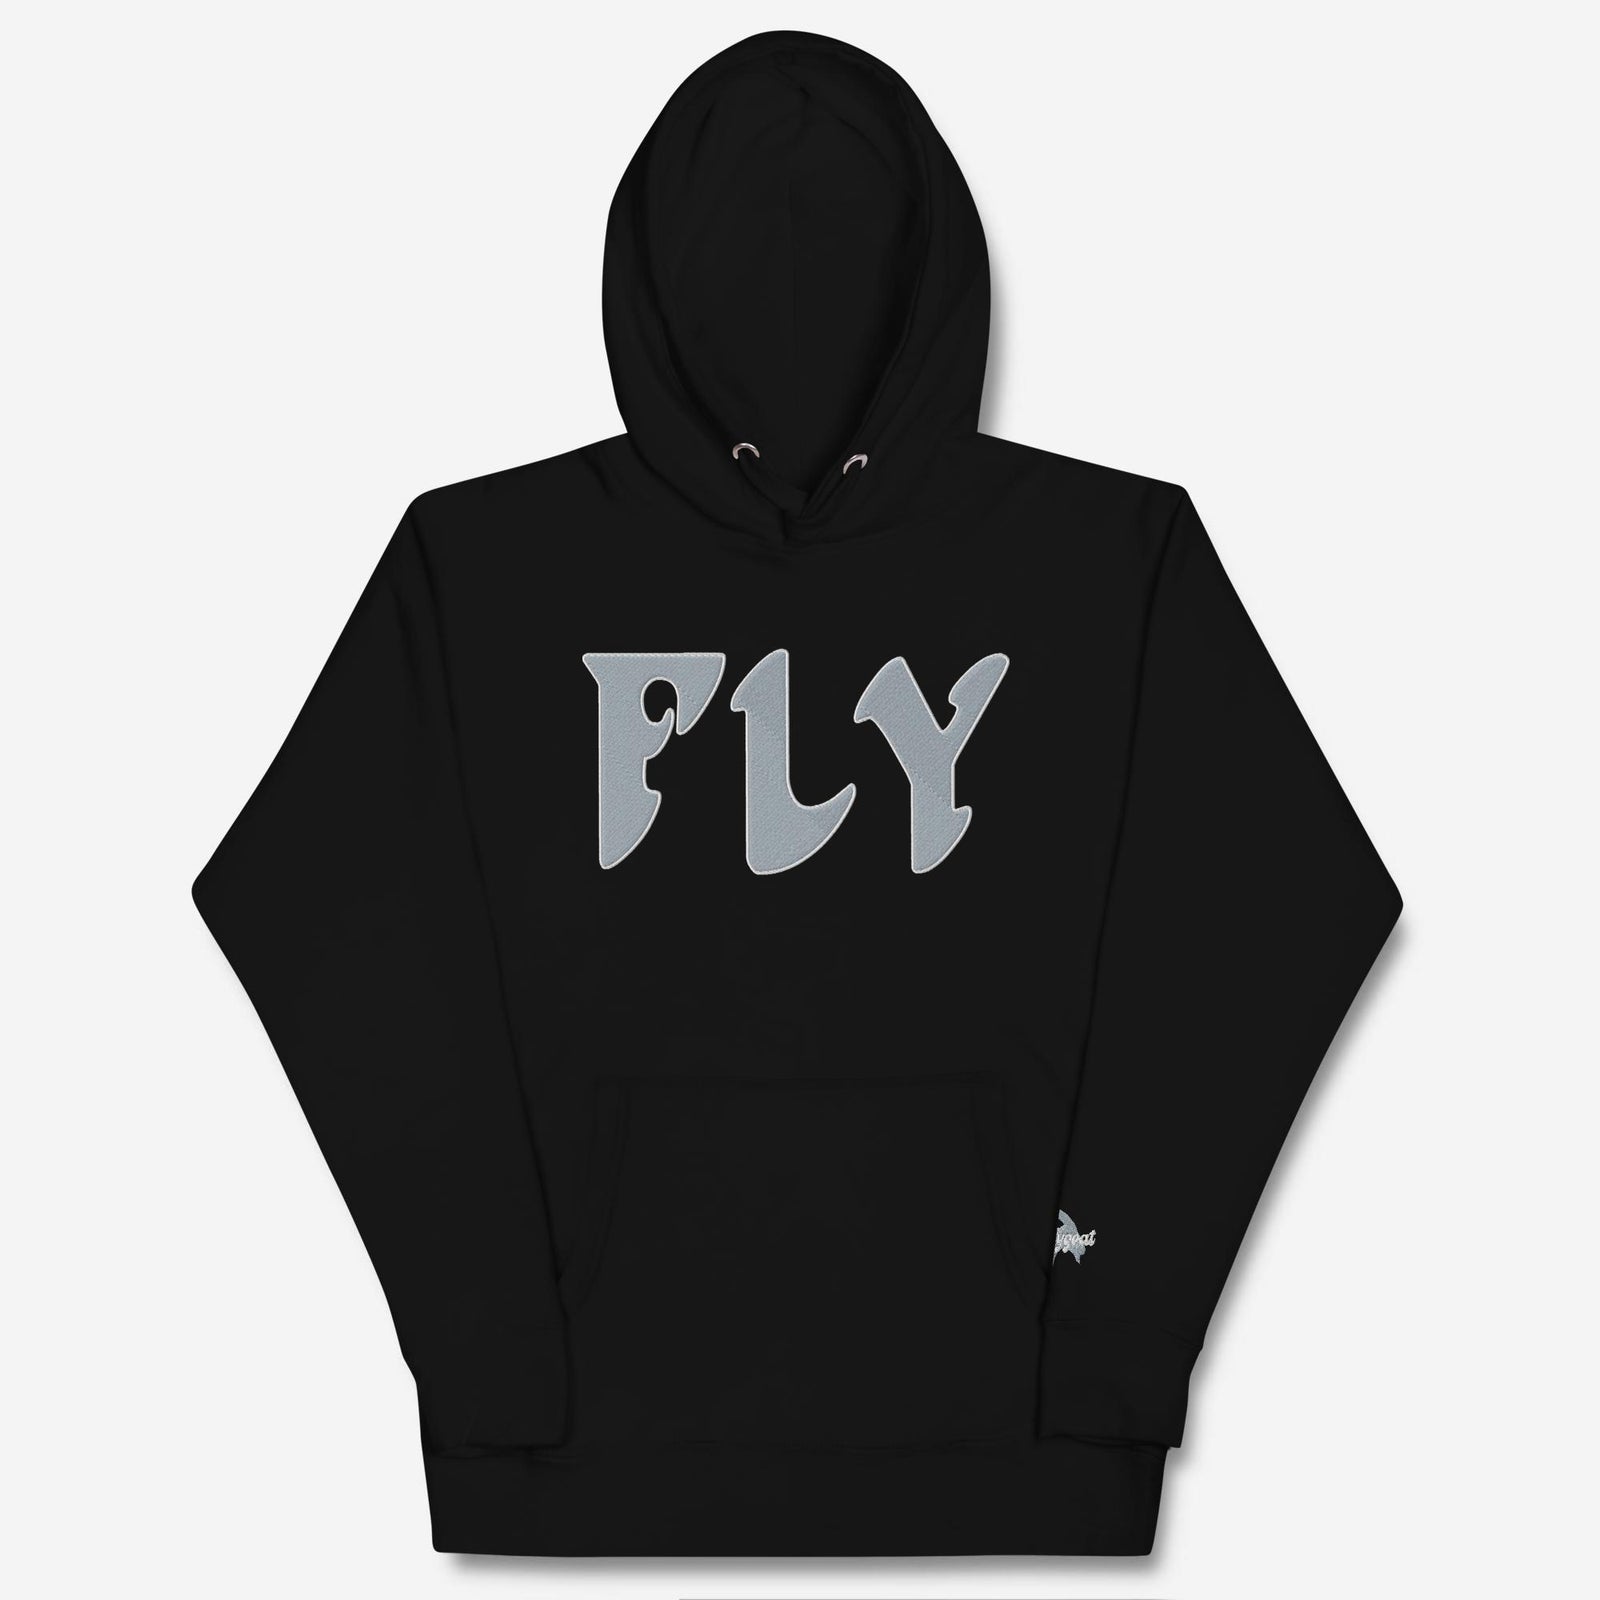 "FLY" Black & Silver Embroidered Hoodie